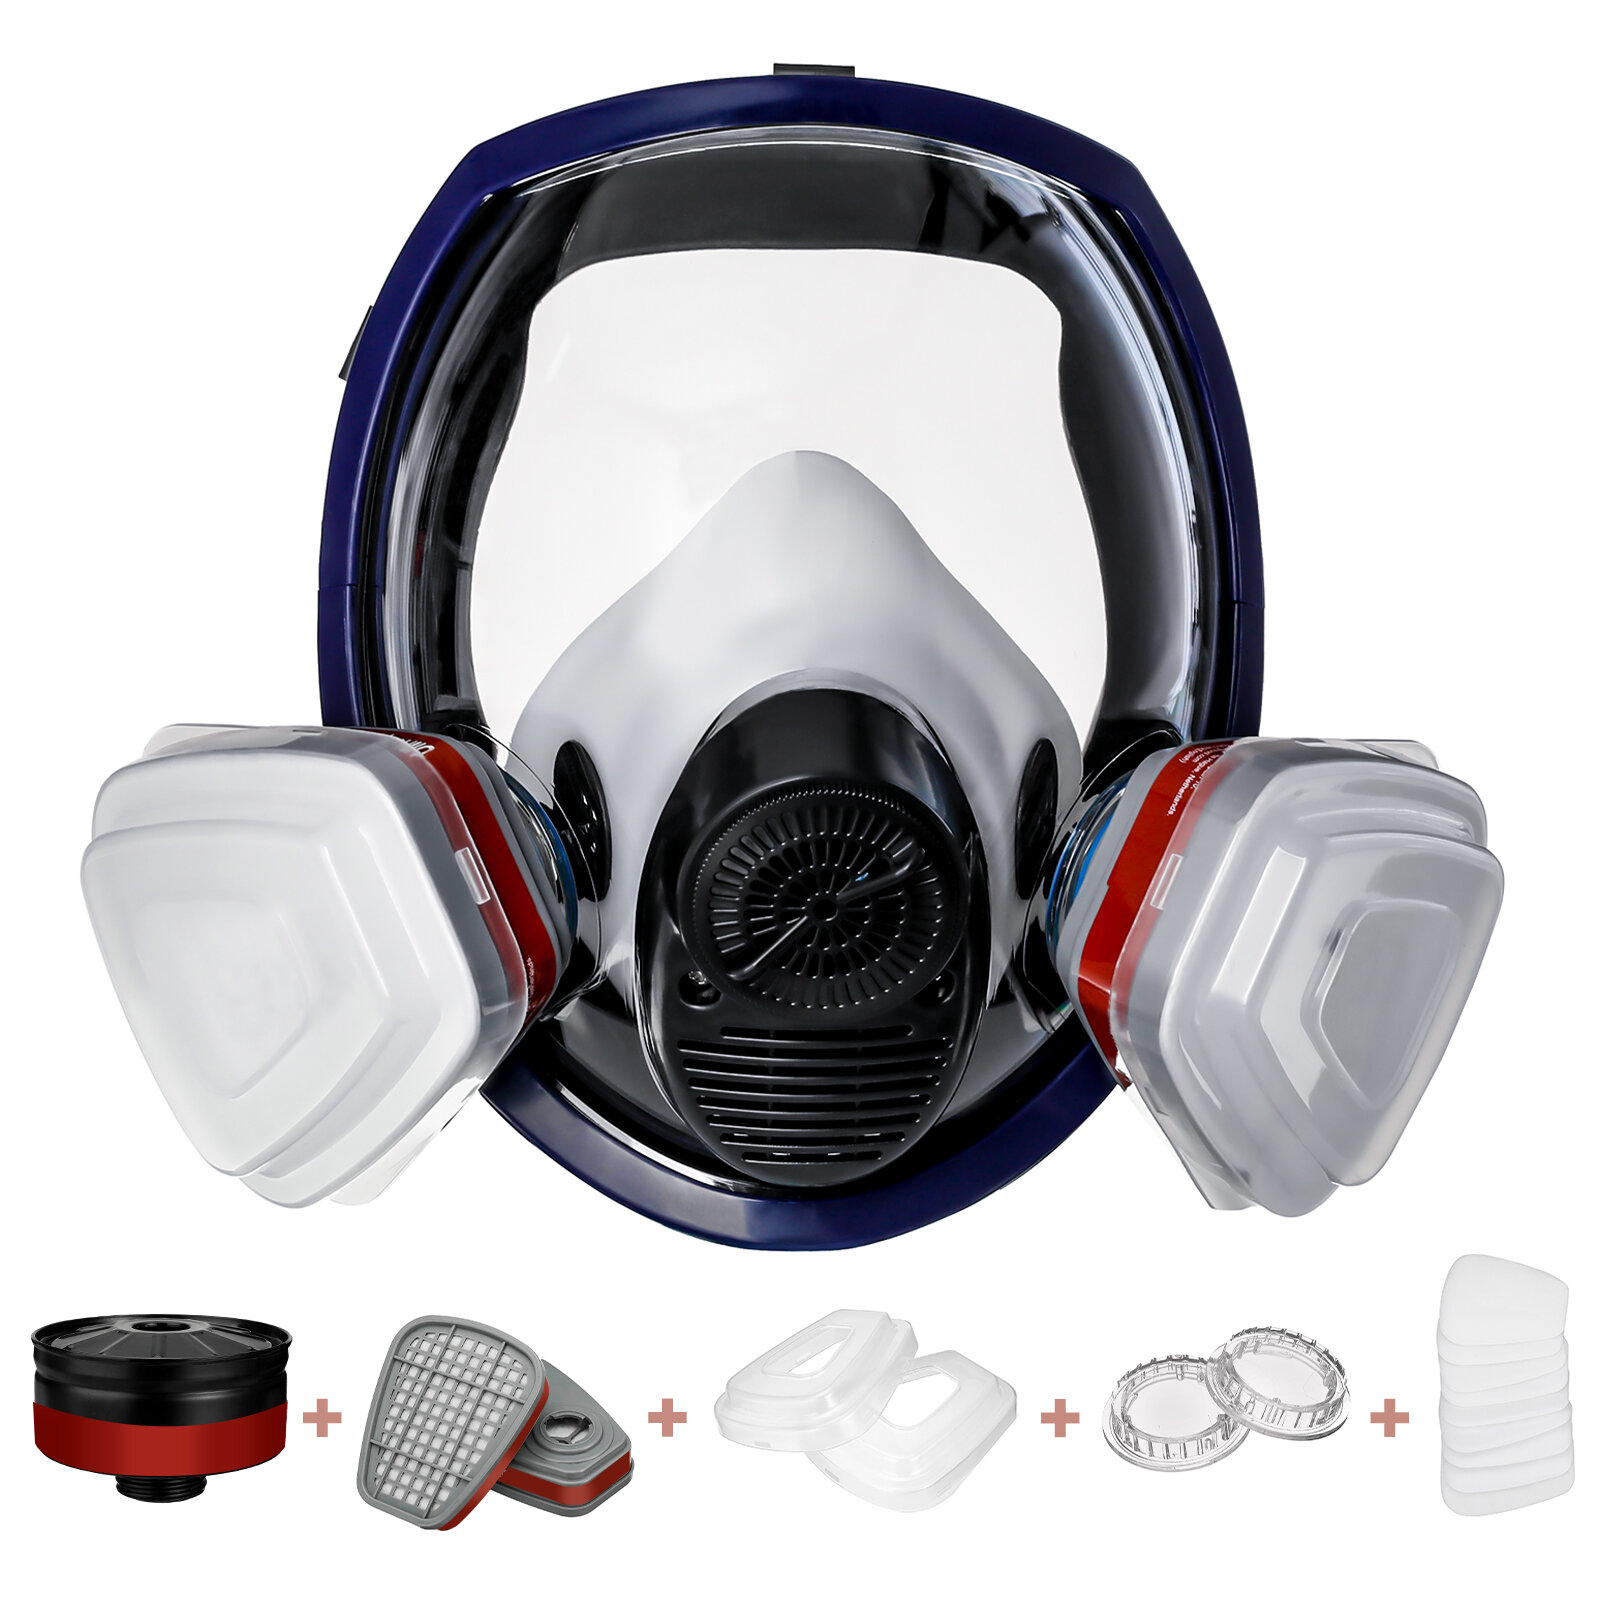 

FM202C Full Face Cover Mask Reusable Glasses Goggle with Filters for Dust Protection Polishing